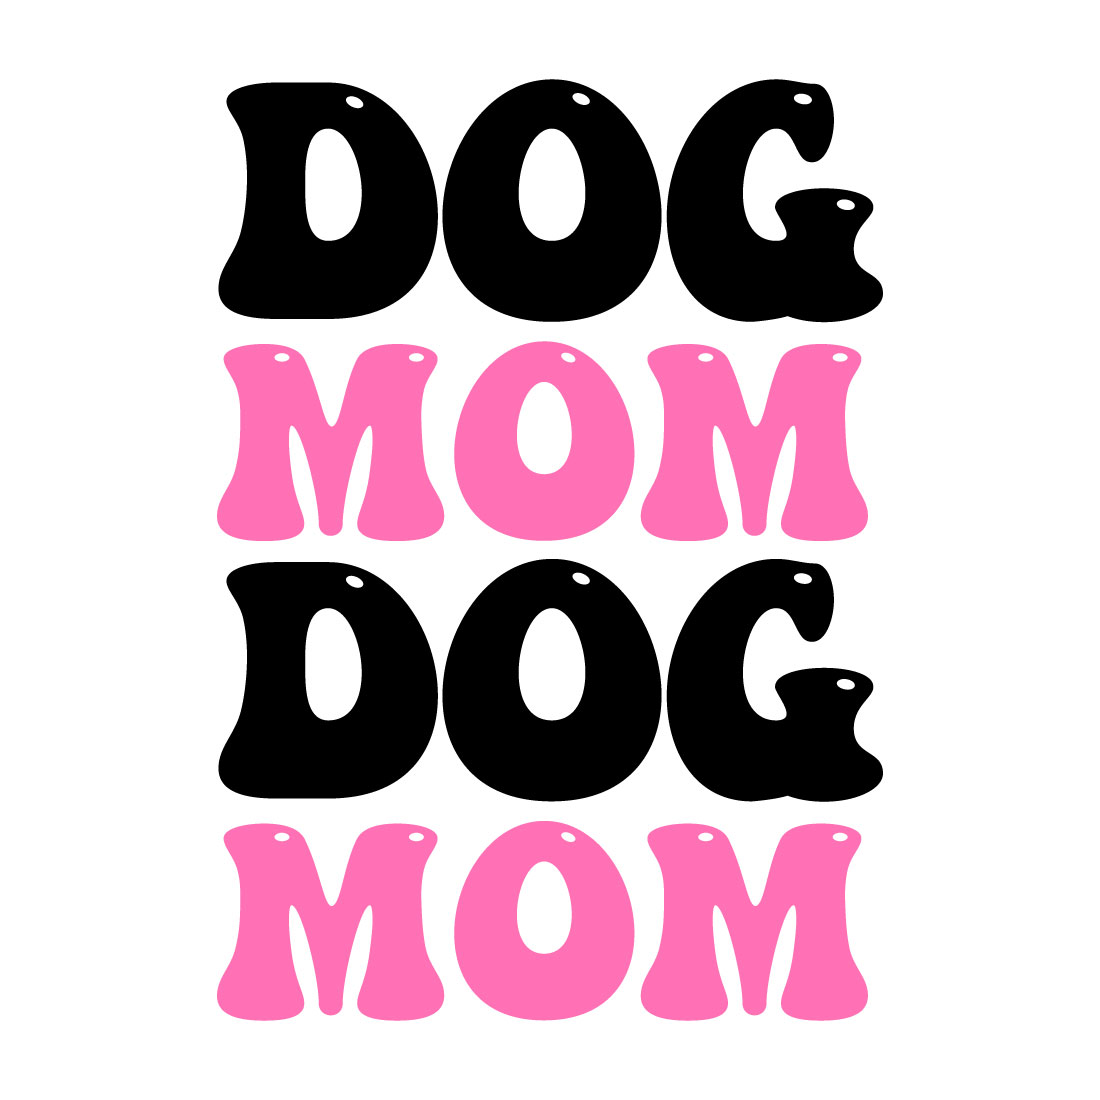 Dog MOM typography design preview image.